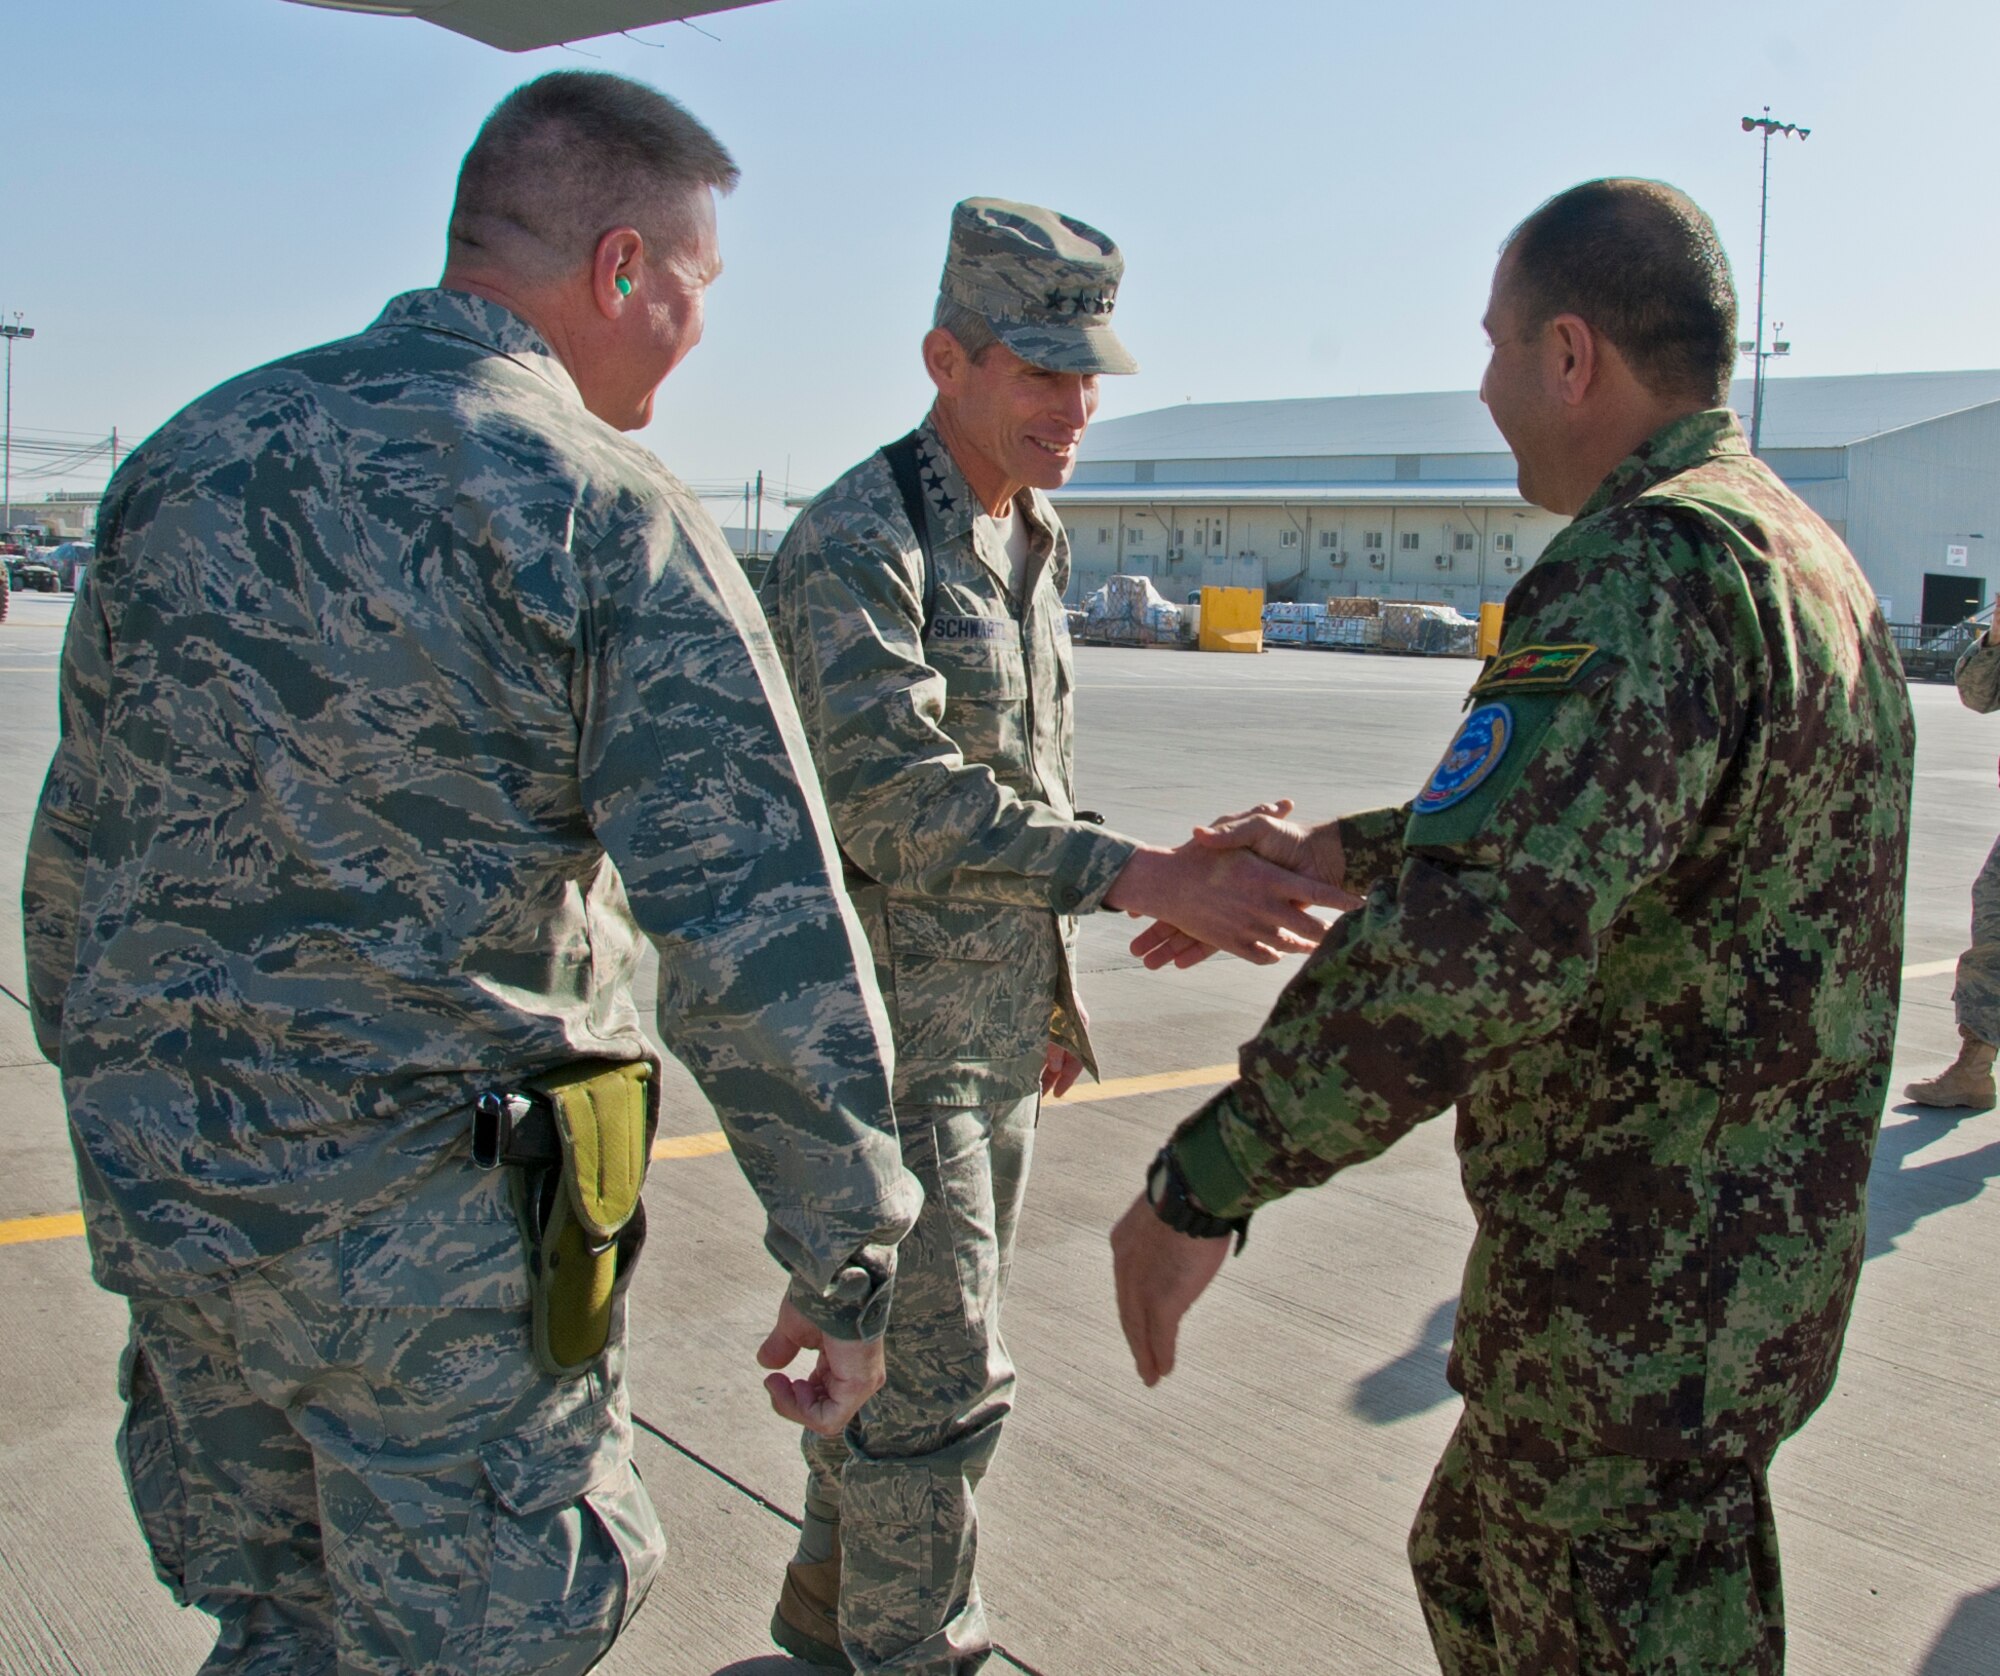 KANDAHAR AIRFIELD, Afghanistan -- Air Force Chief of Staff Gen. Norton Schwartz shakes hands with Afghan Maj. Gen. Abdul Raziq Sherzai, Afghan National Air Force, after arriving at Kandahar Airfield, Nov. 16, 2011. During his visit, Schwartz held an all call and visited with Airmen to discuss various service-wide issues. (U.S. Air Force photo/Senior Airman David Carbajal)